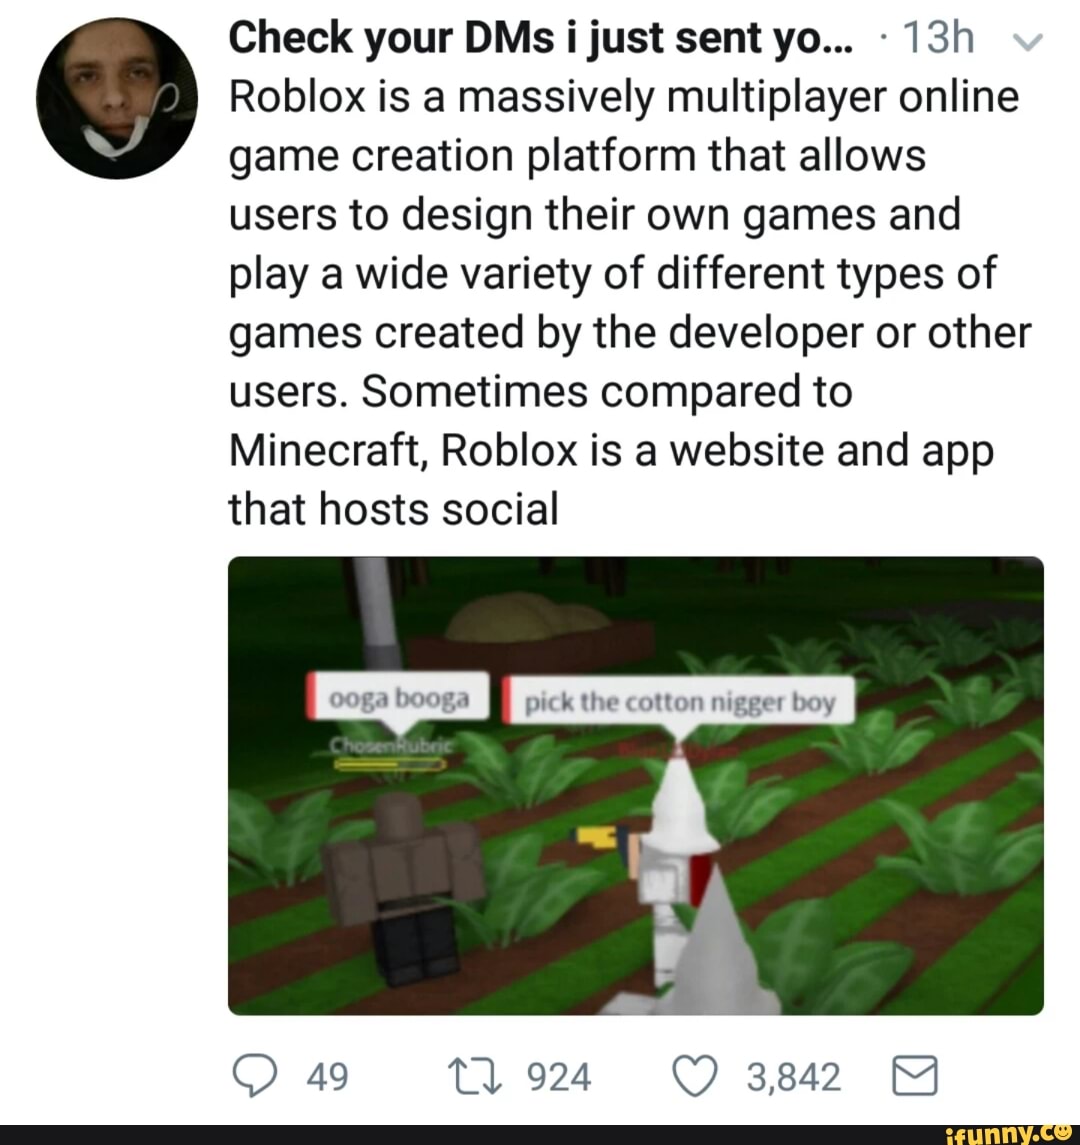 Check Your Dms I Just Sent Yo 13h Roblox Is A Massively Multiplayer Online Game Creation Platform That Allows Users To Design Their Own Games And Play A Wide Variety Of - ooga booga roblox cotton